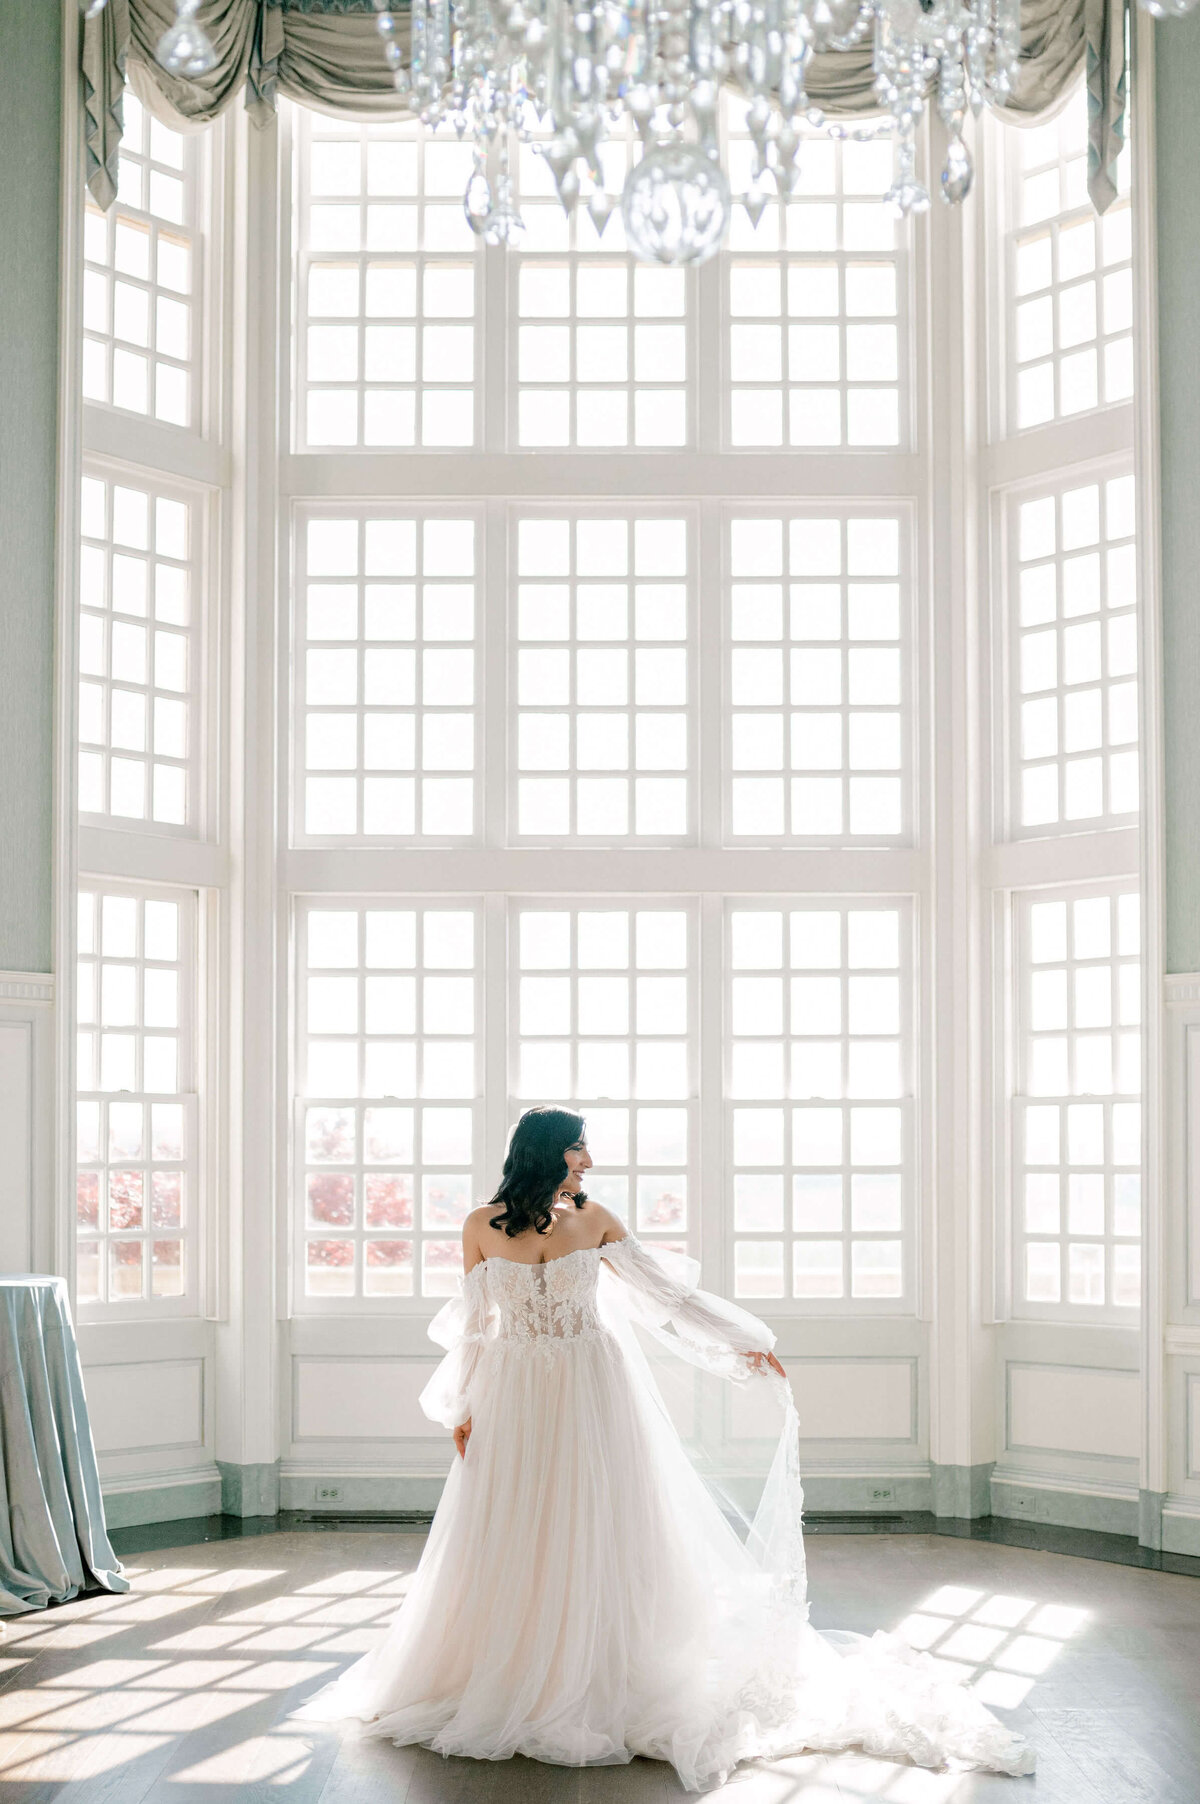 Full gown Bridal portrait at the Estate at River Run